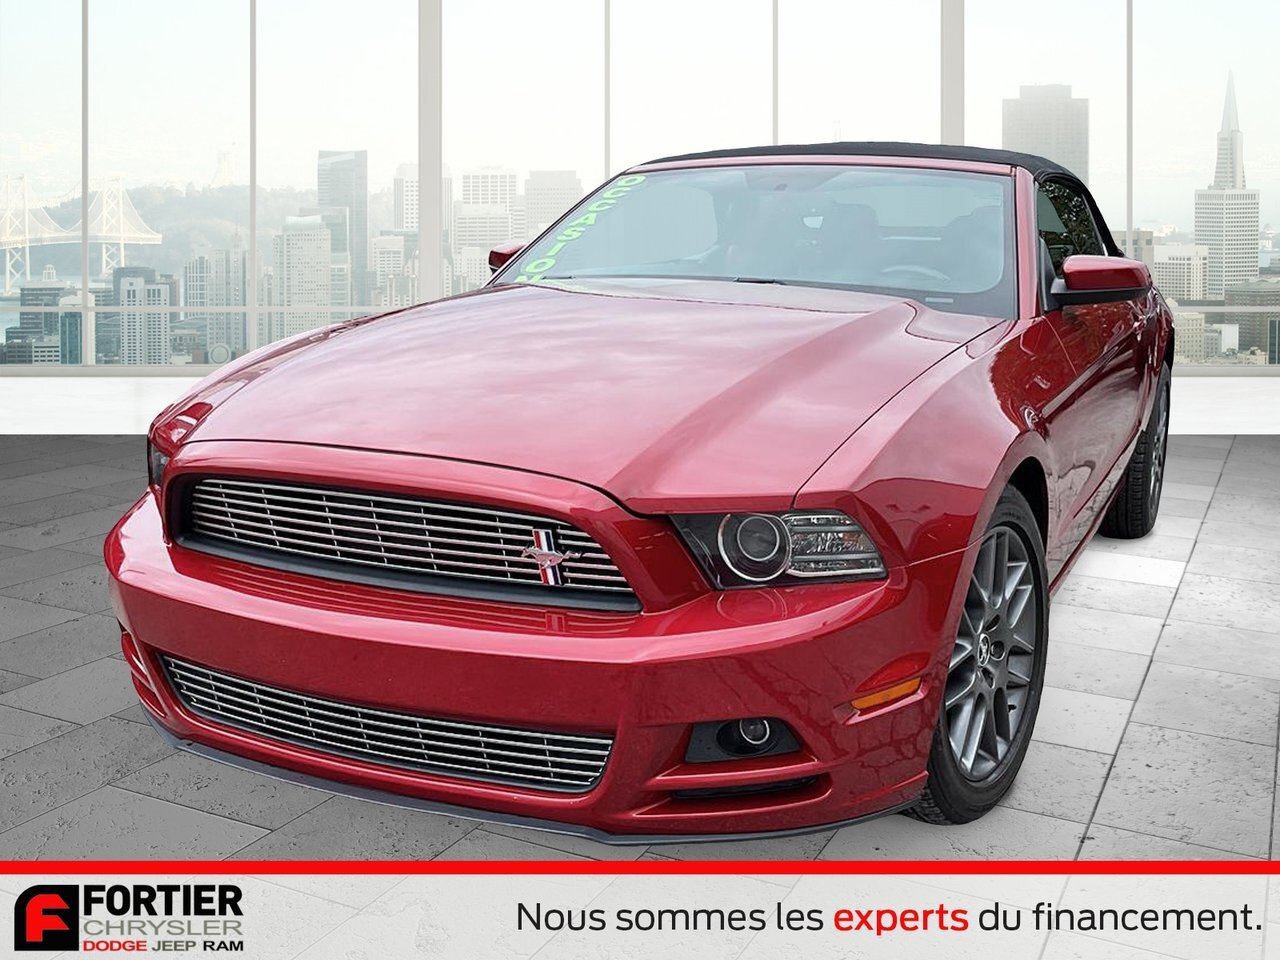 2014 Ford Mustang V6 Premium V6 + LEATHER + AUTOMATIC + HEATED SEATS